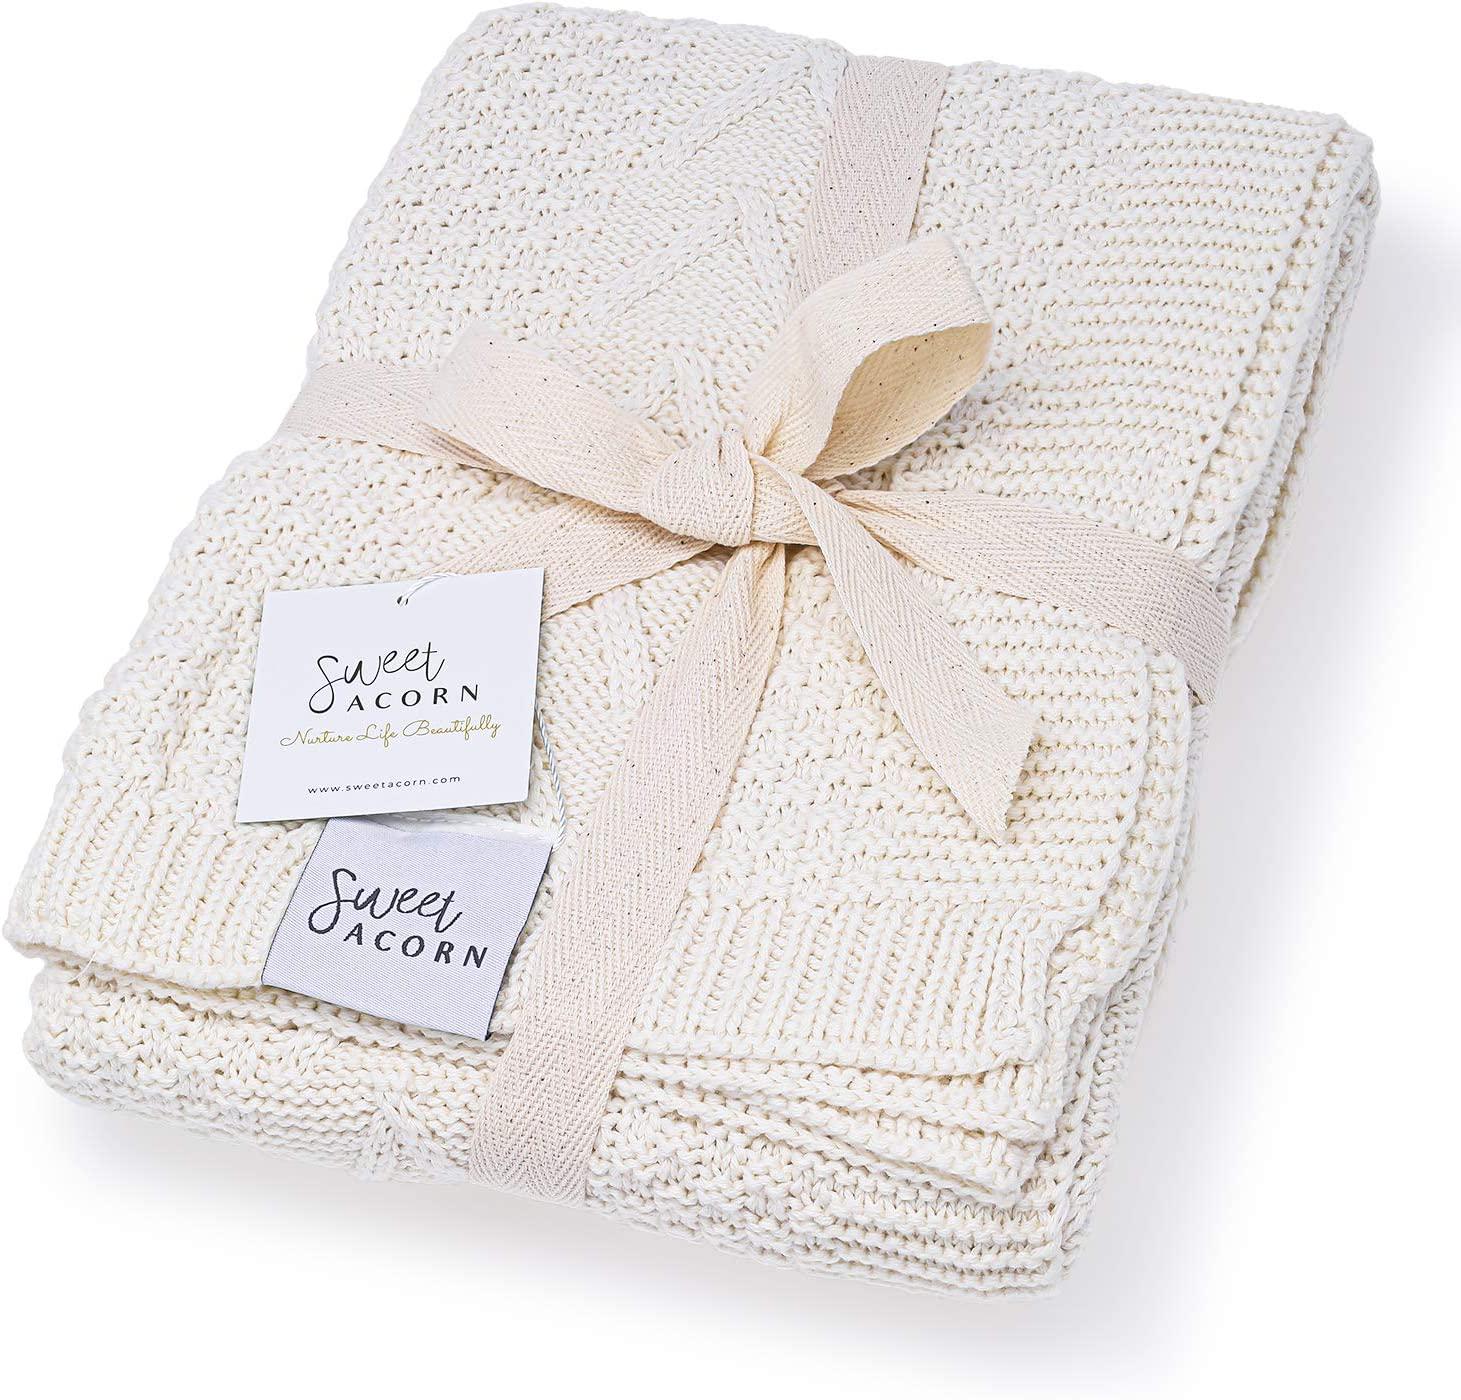 Sweet Acorn Knit Baby Blanket in Cable Pattern, Organic Cotton Blankets for Crib or Stroller, Receiving Blankets - Salt White-